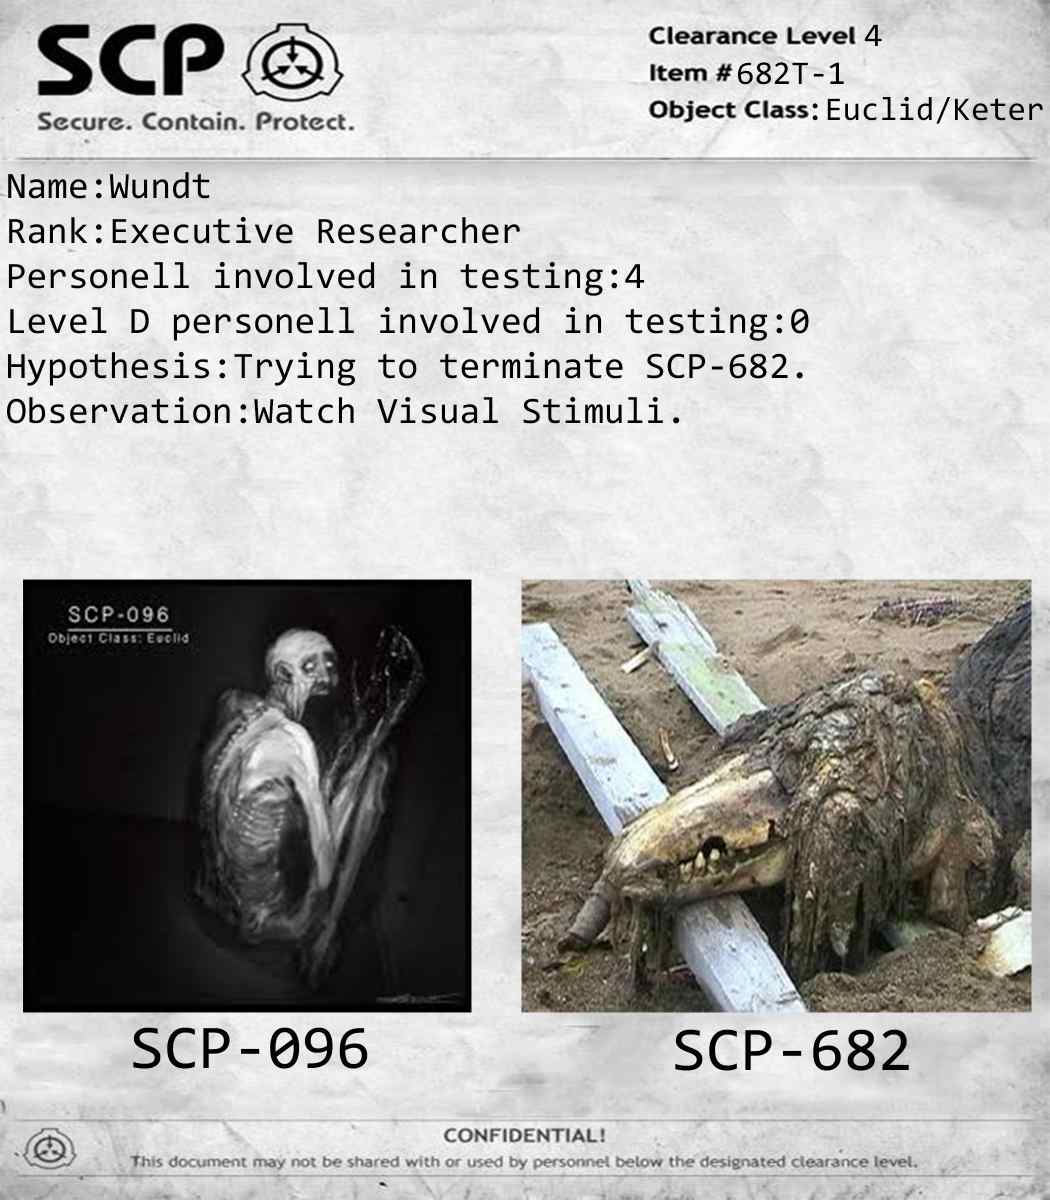 SCP-714 and SCP-049-2 Test - Foundation Test Logs - Gaminglight Forums -  GMod Community